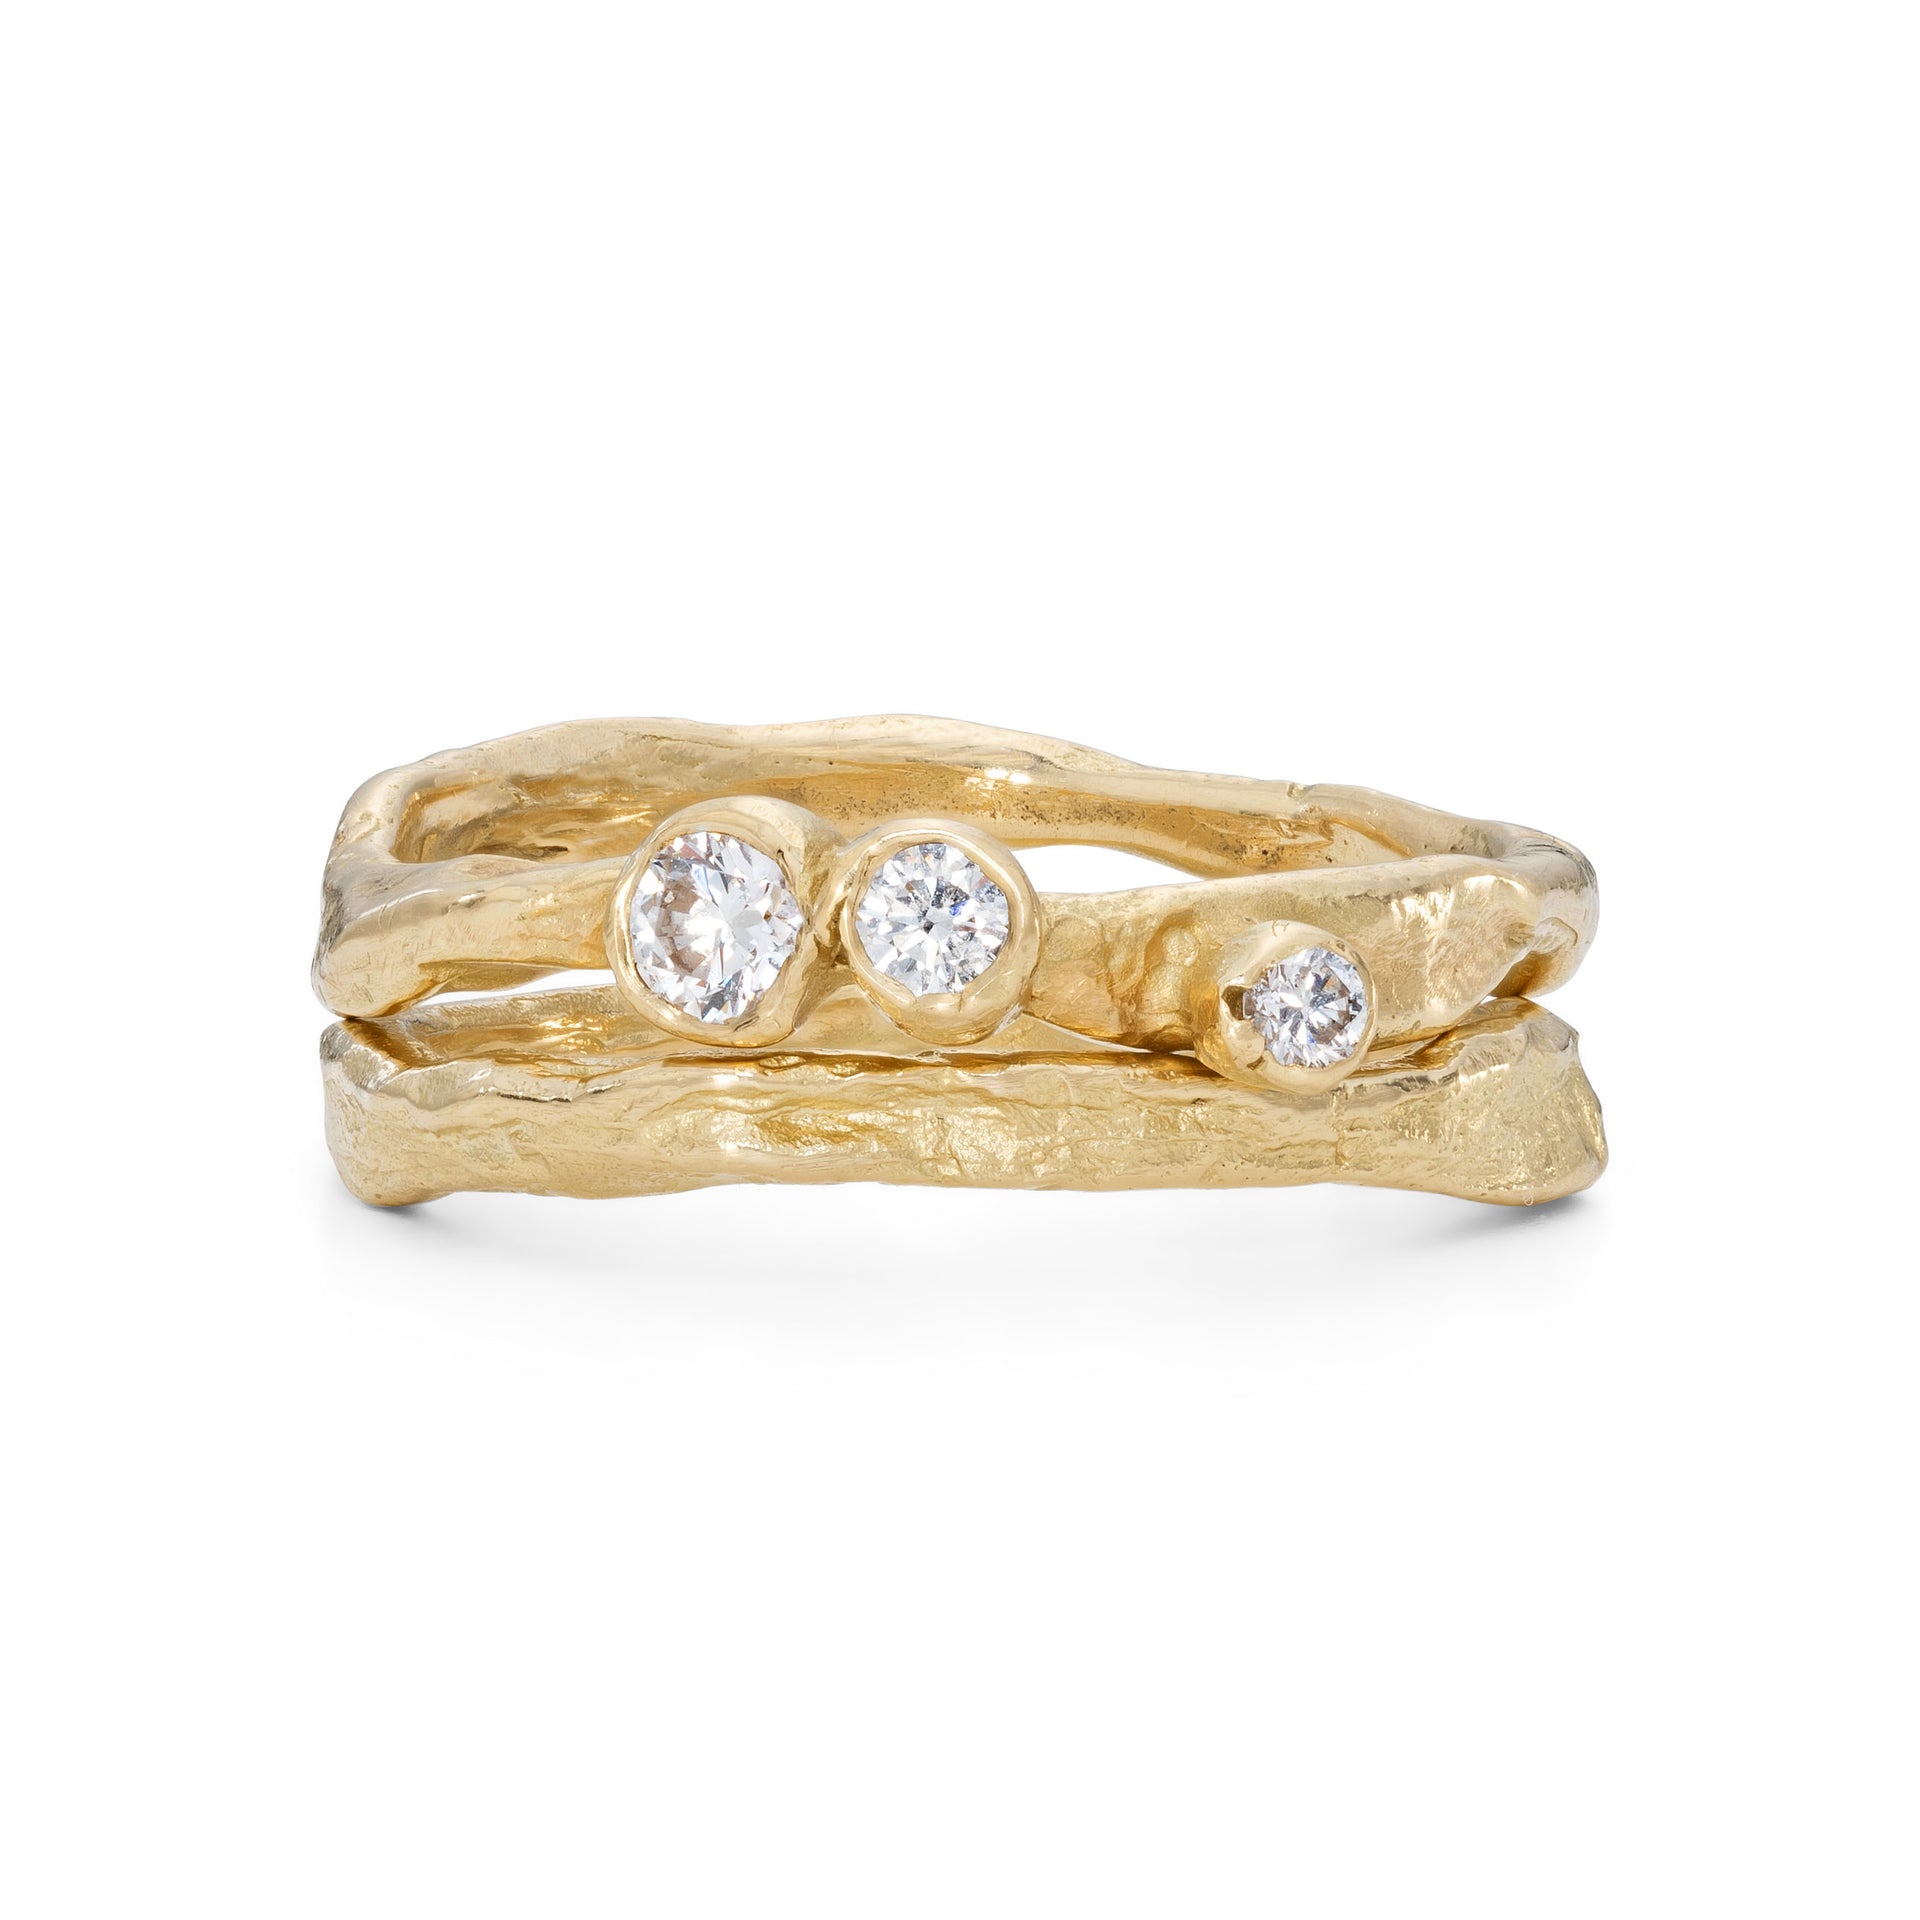 An 18ct gold ring in a craggy design, set with 3 diamonds. Photographed with a gold band sitting next to it, with a craggy texture.